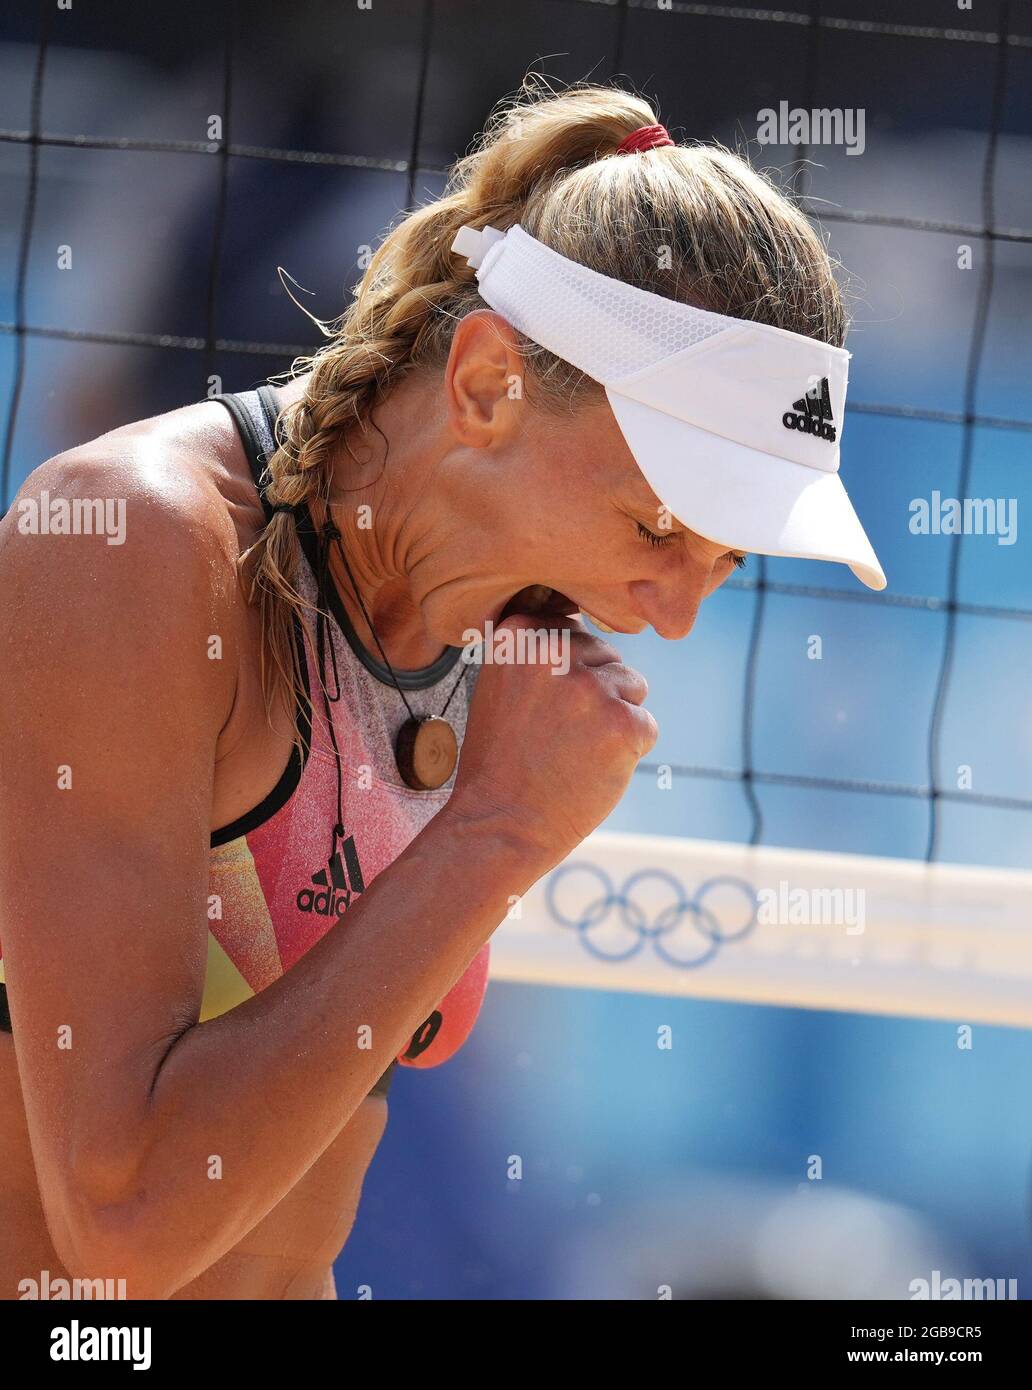 Tokyo, Japan. 3rd Aug, 2021. Germany's Margareta Kozuch reacts during the women's quarterfinal match of beach volleyball between Germany's Laura Ludwig/Margareta Kozuch and April Ross/Alix Klineman of the United States at the Tokyo 2020 Olympic Games in Tokyo, Japan, Aug. 3, 2021. Credit: Li He/Xinhua/Alamy Live News Stock Photo